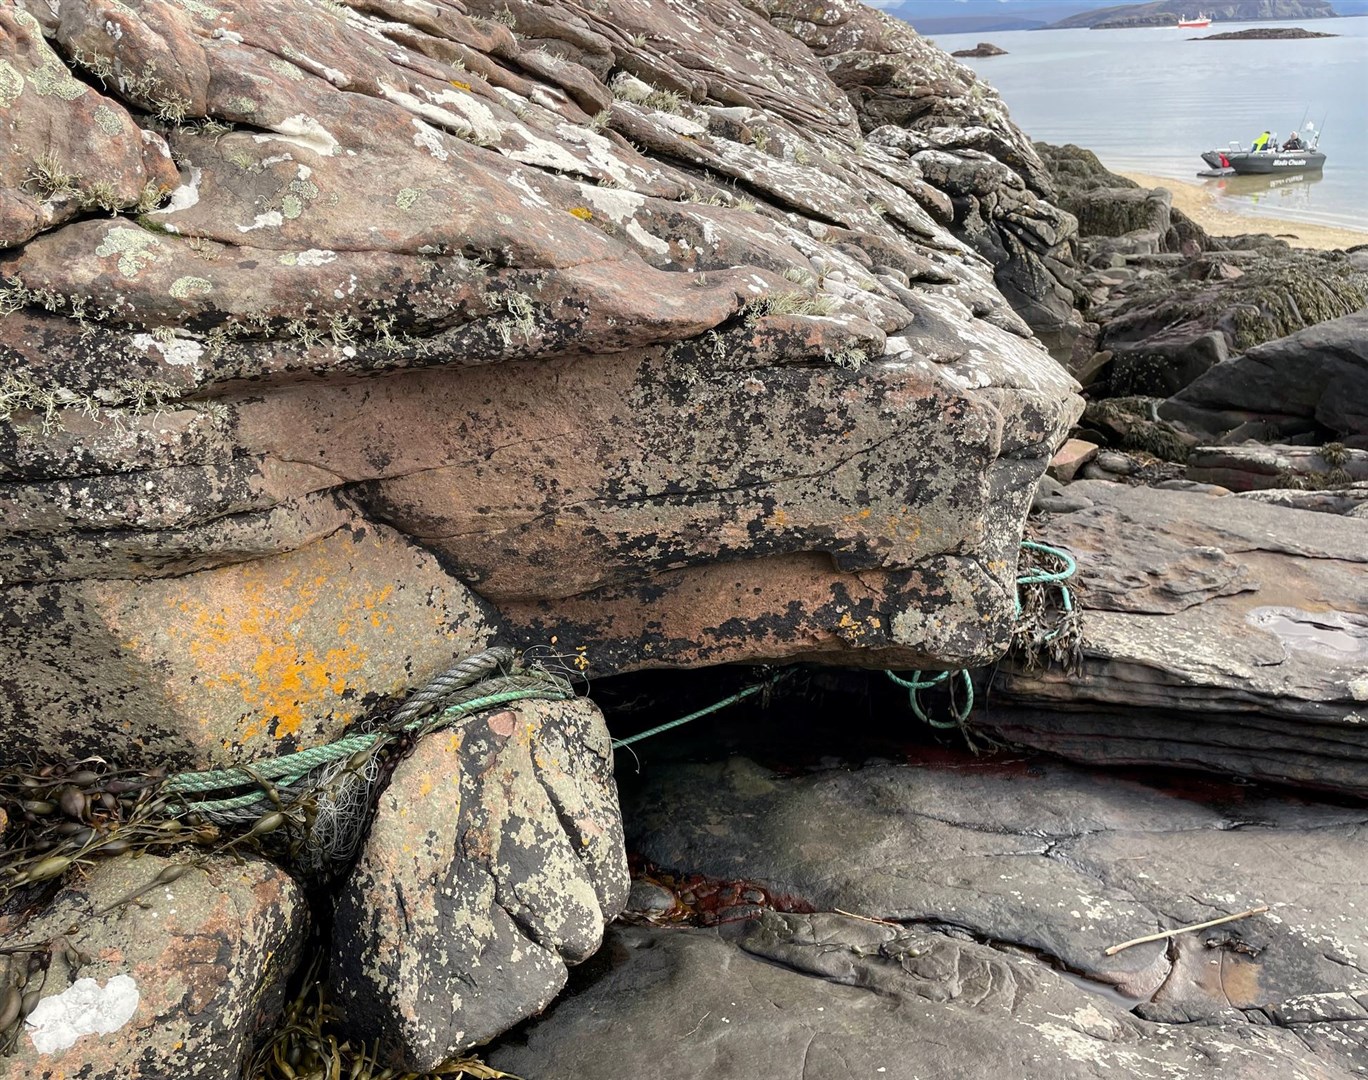 The ropes tangled around the rocks on Fada, before being removed by the Ullapool Sea Savers.